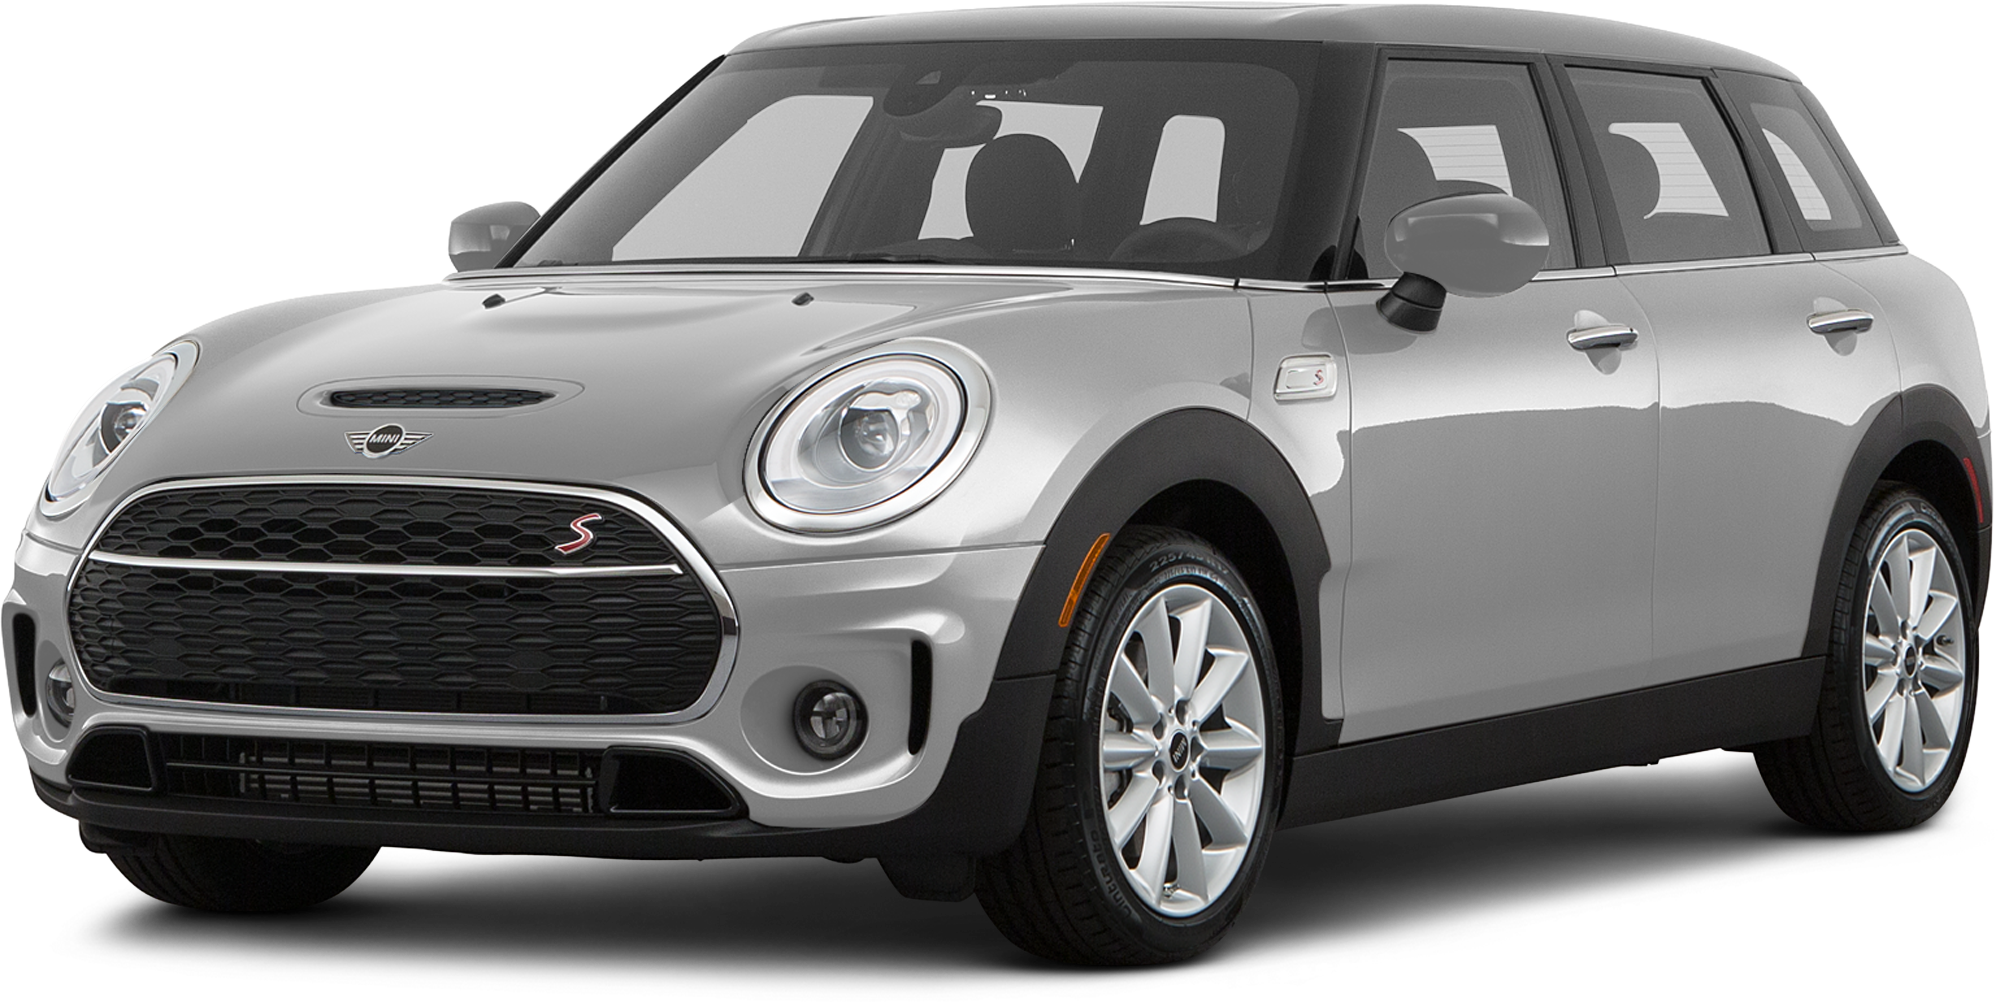 2021-mini-clubman-incentives-specials-offers-in-fort-lauderdale-fl